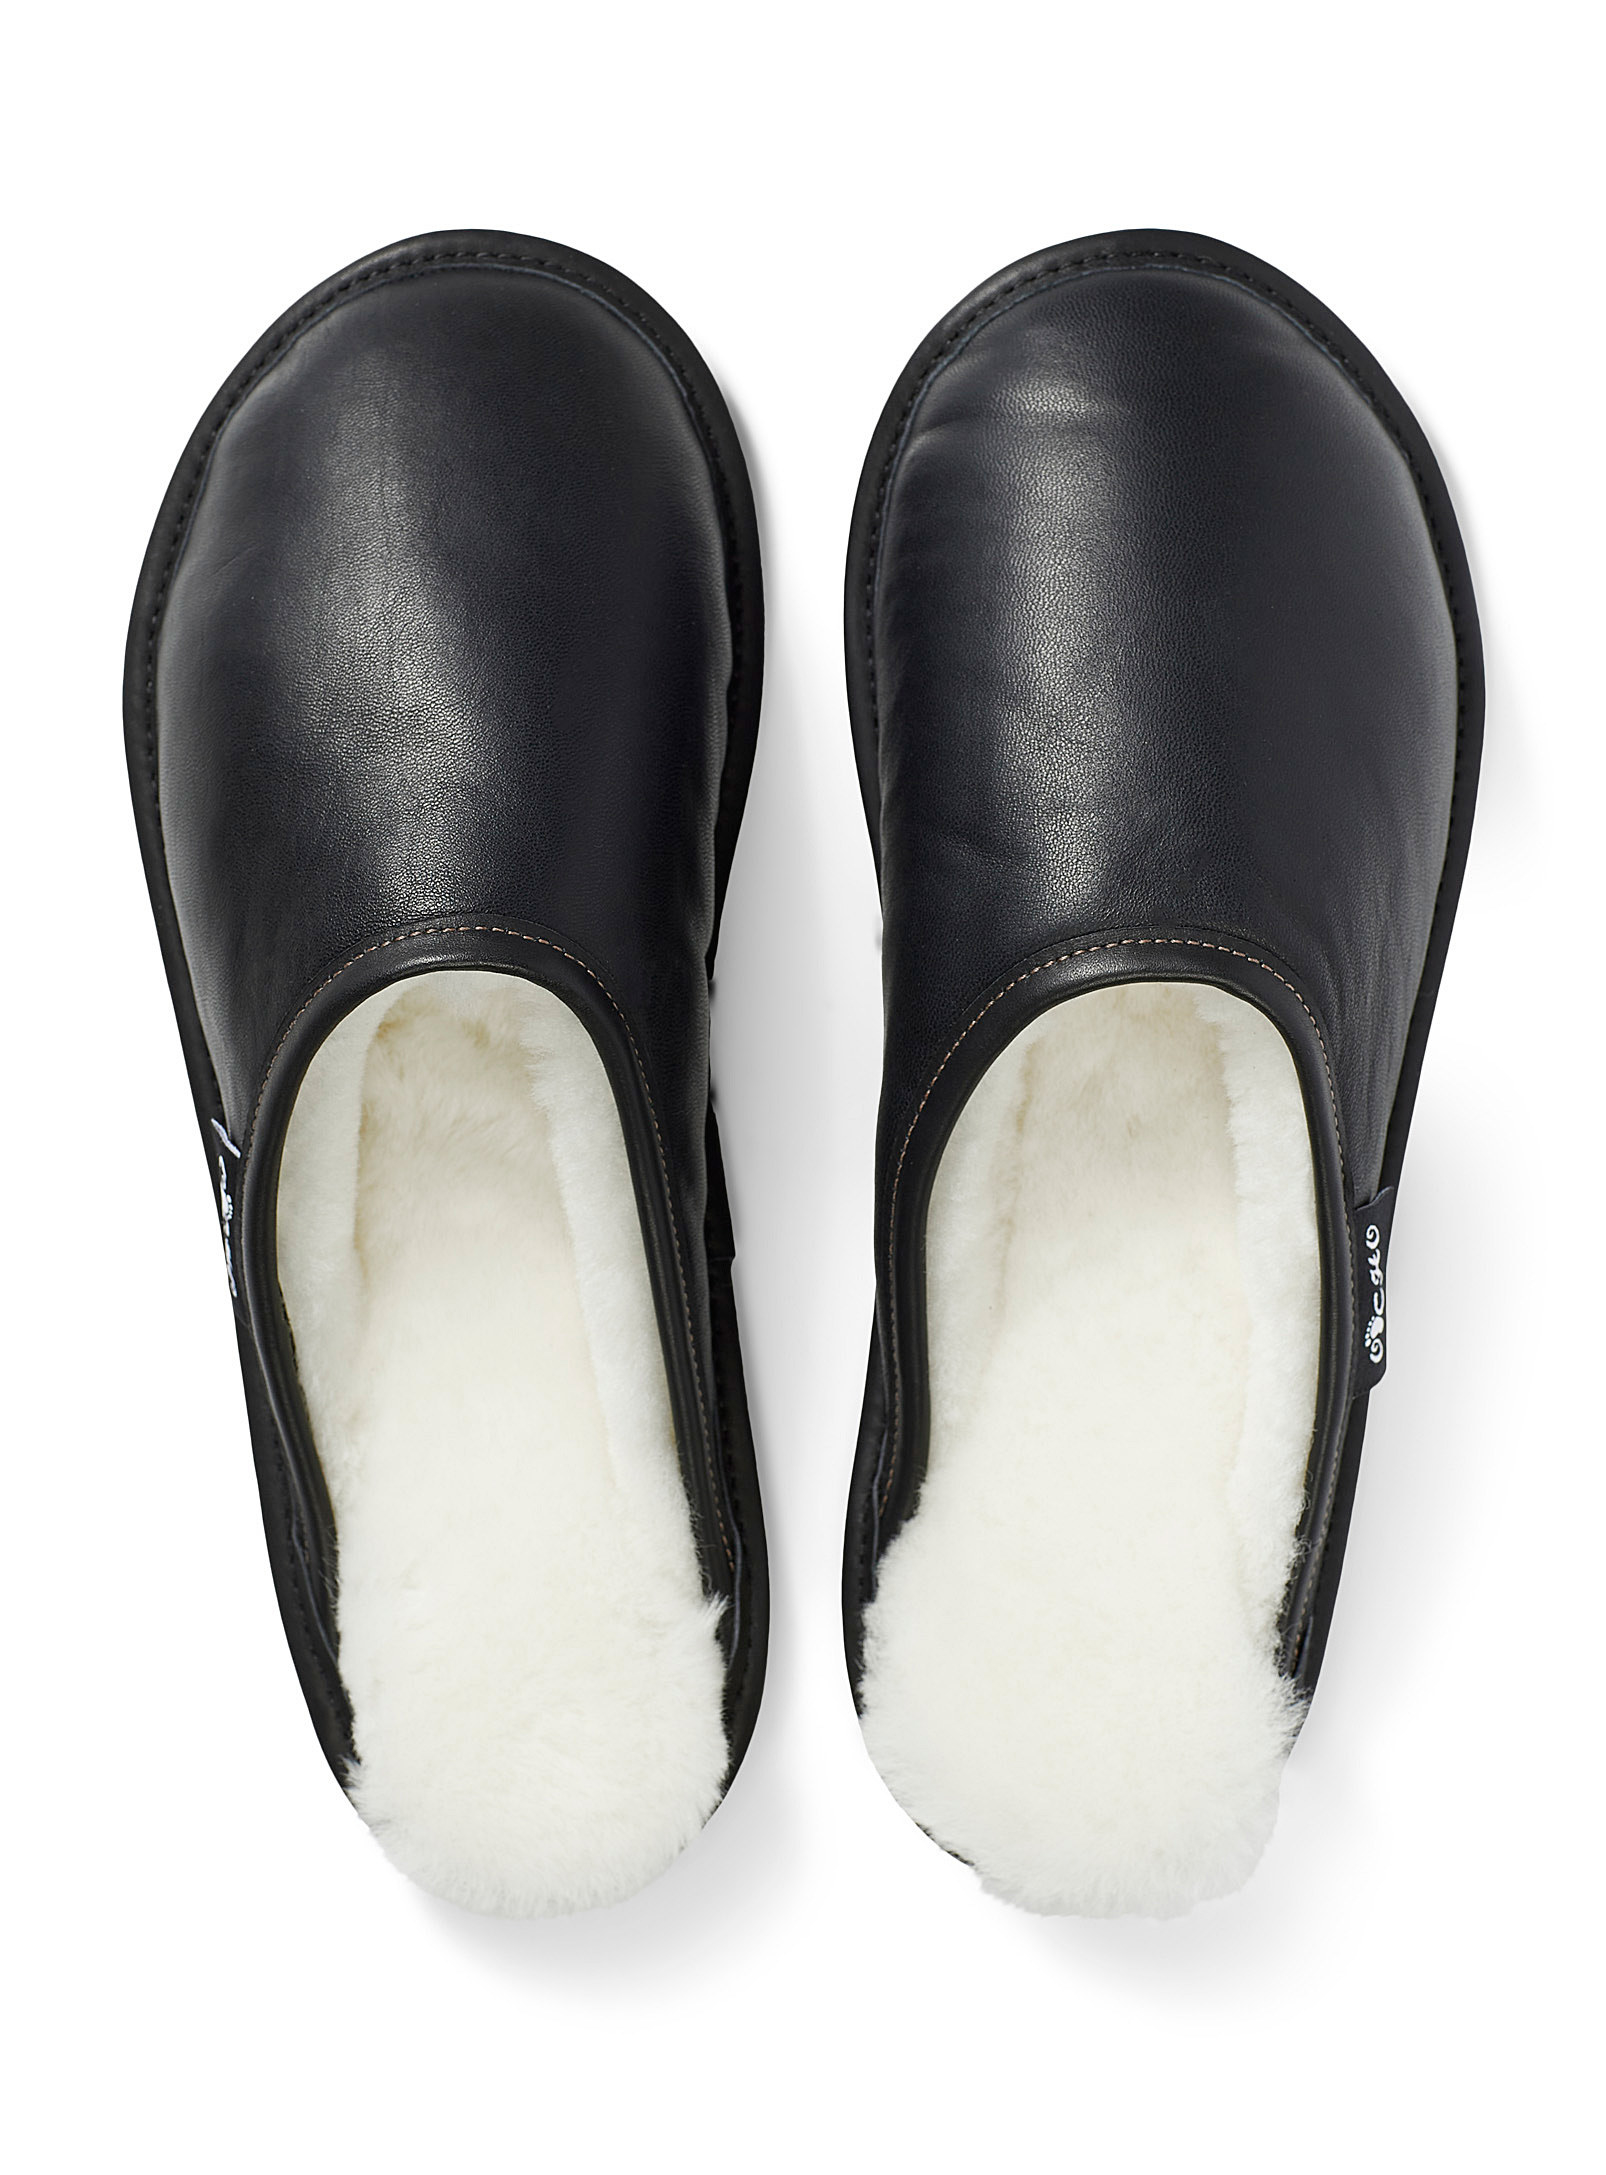 A pair of slippers with a fluffy lining